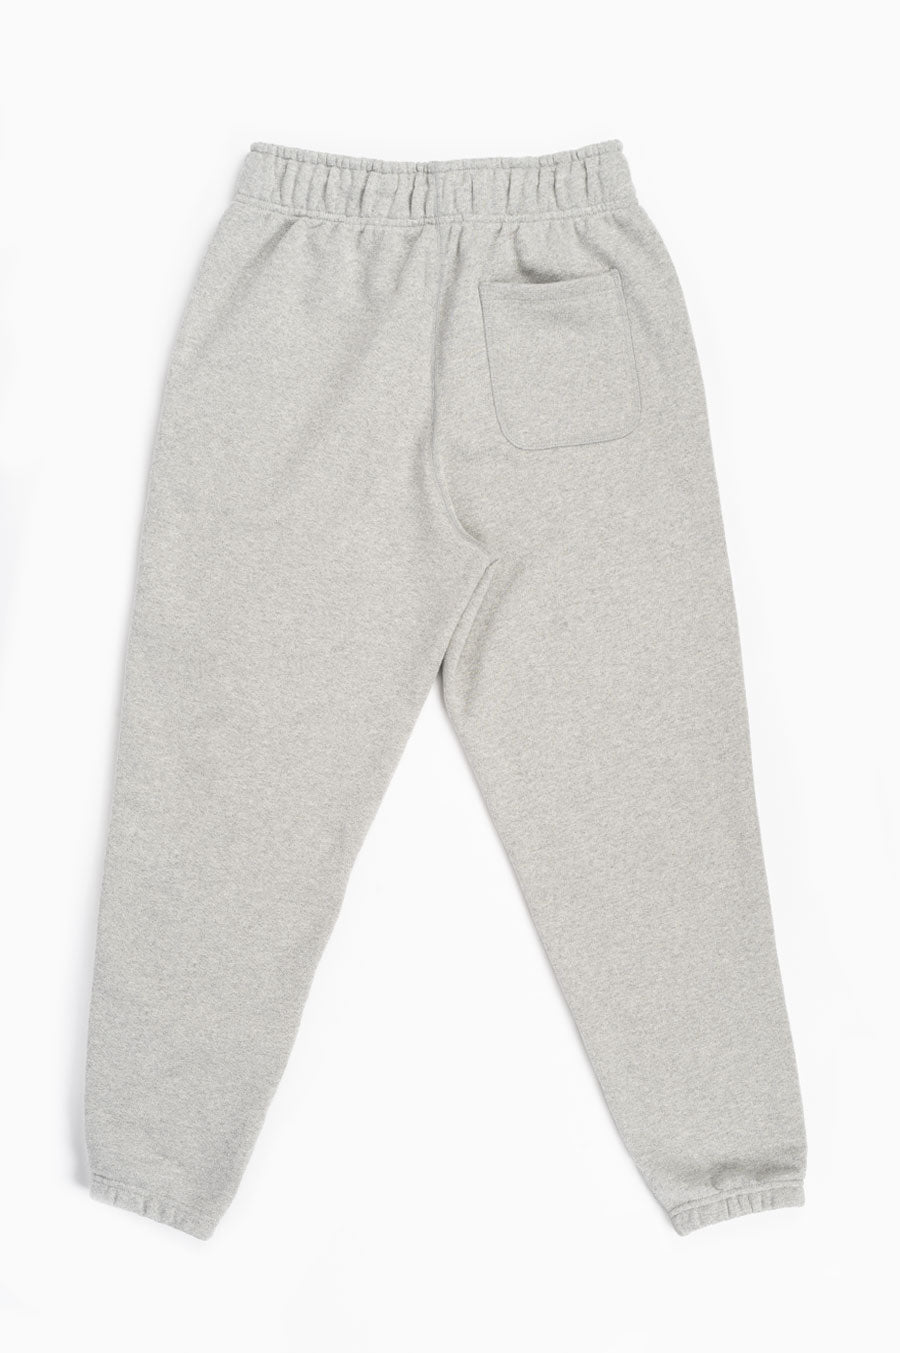 USA BALANCE – IN BLENDS ATHLETIC SWEATPANT GREY NEW MADE